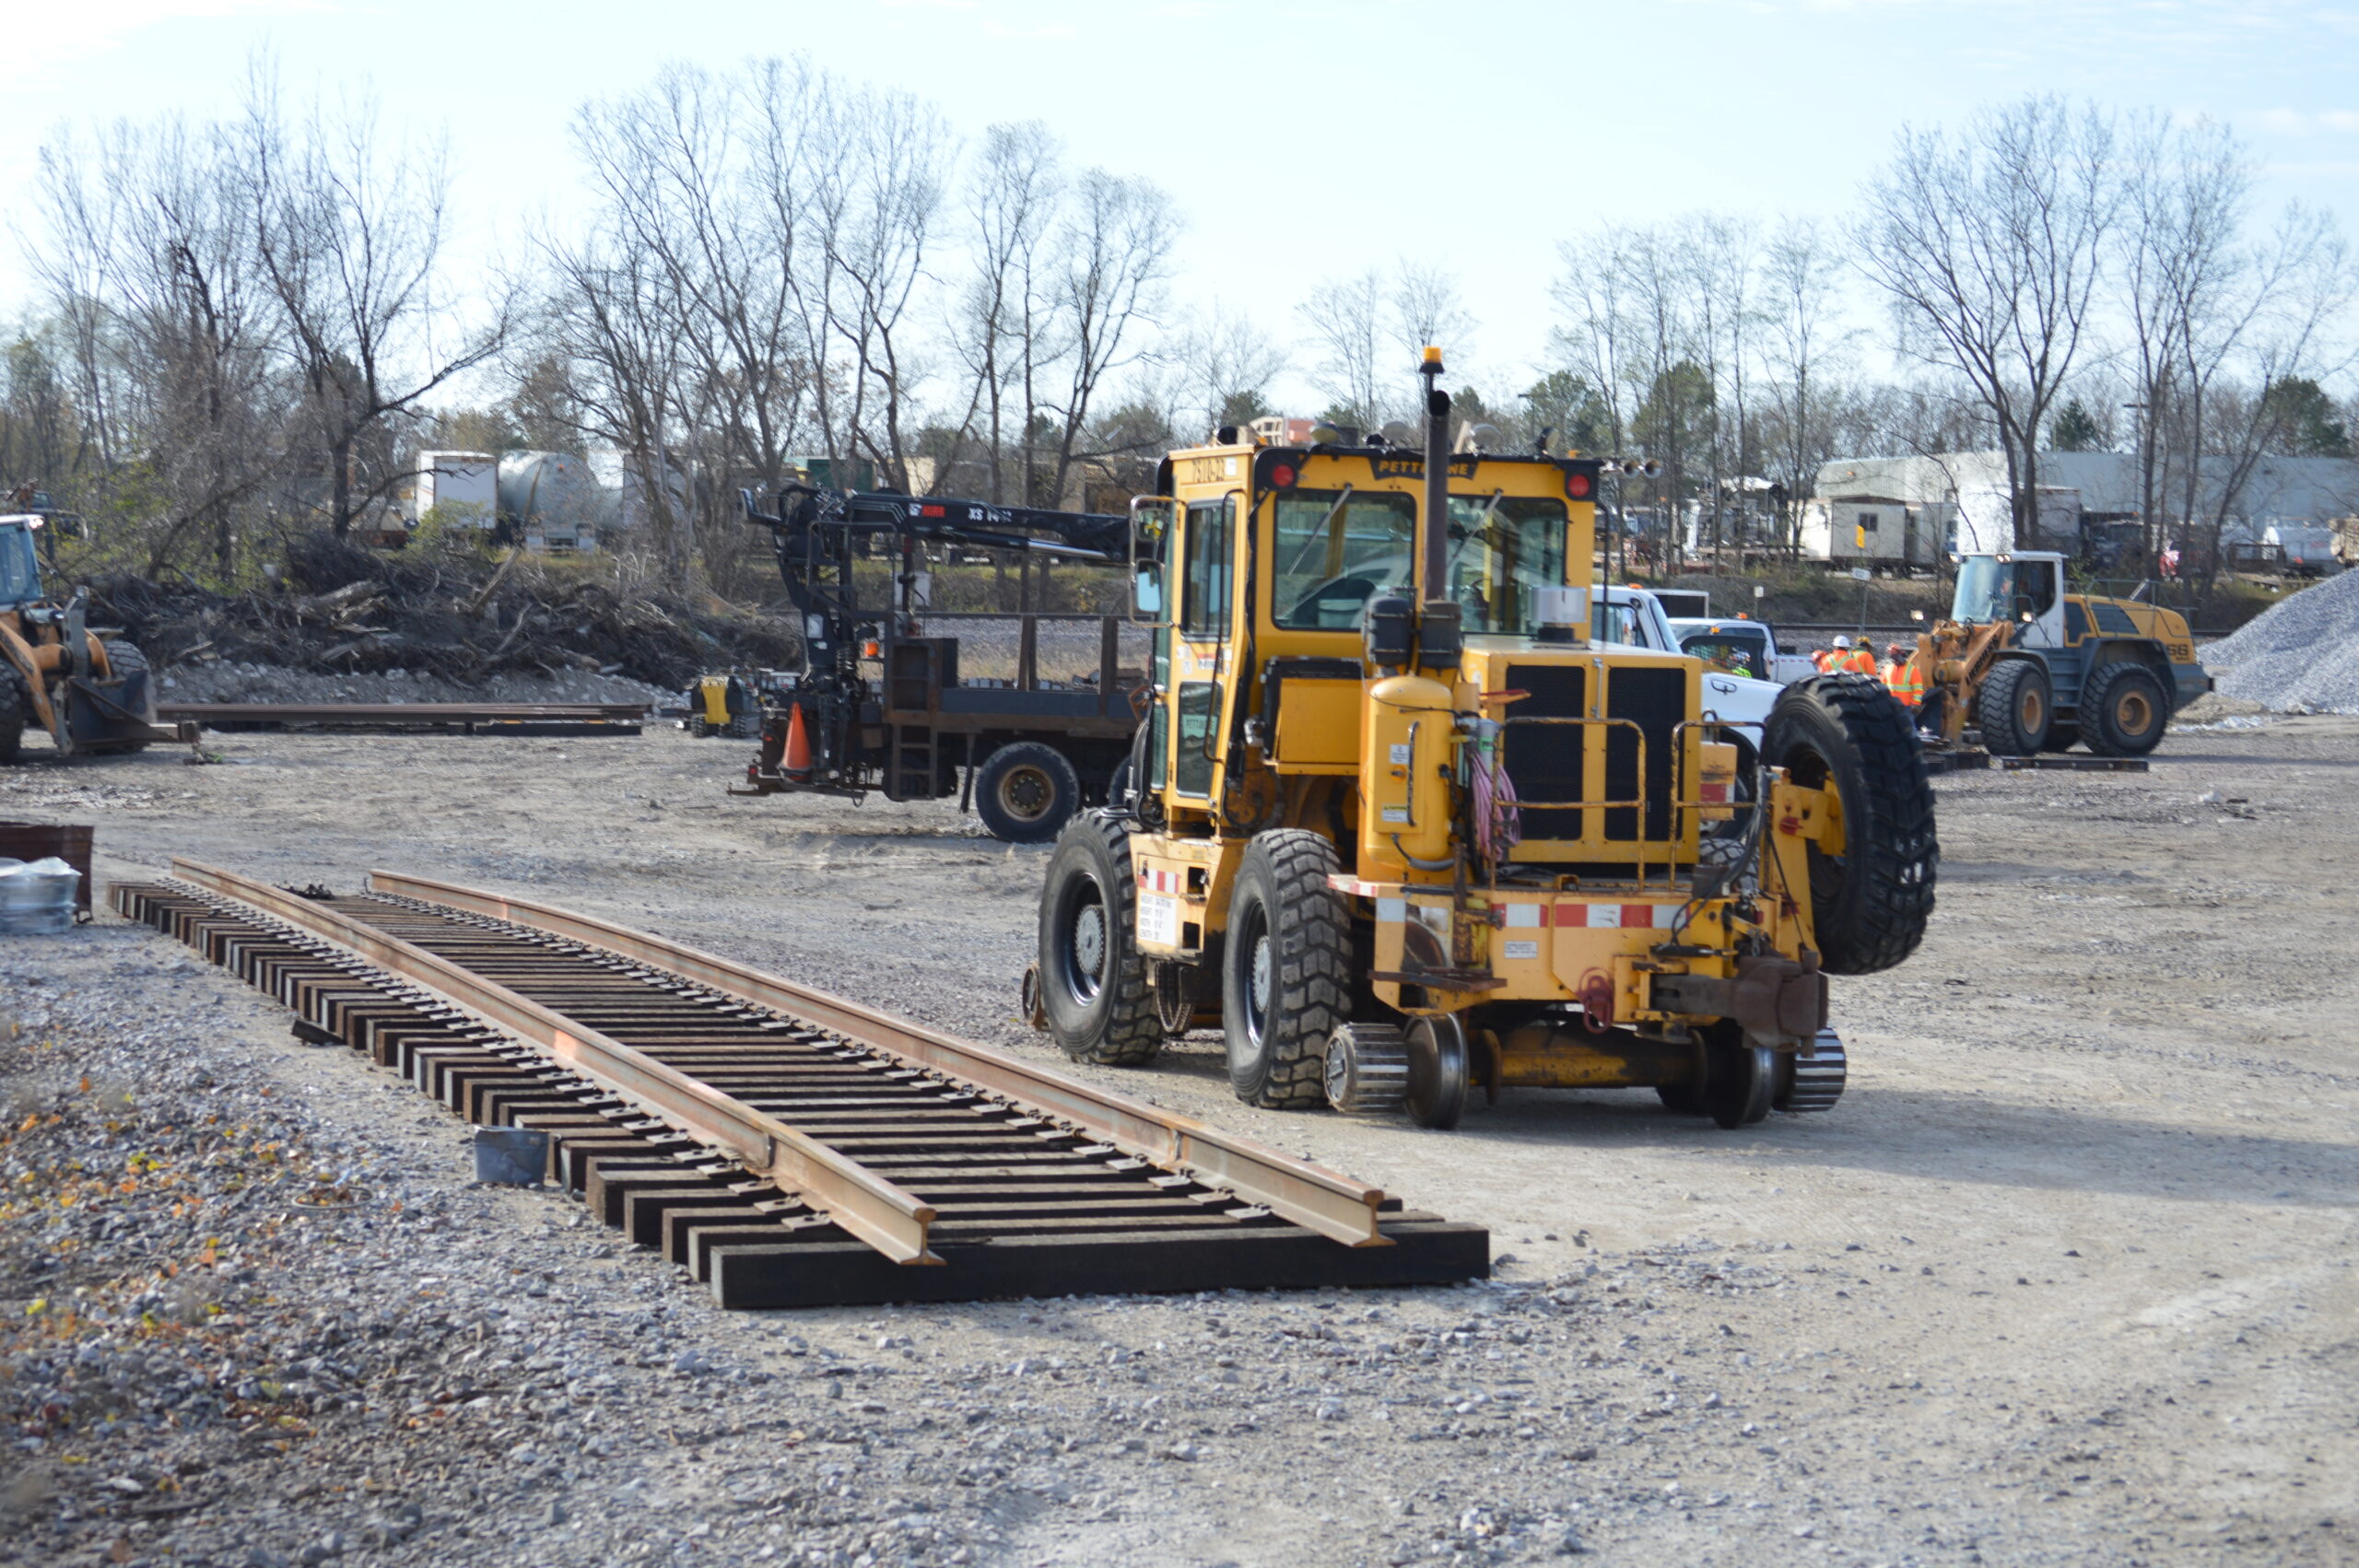 A piece of panel track lays in the staging yard next to a yellow construction tractor with rubber tires and rail wheels.